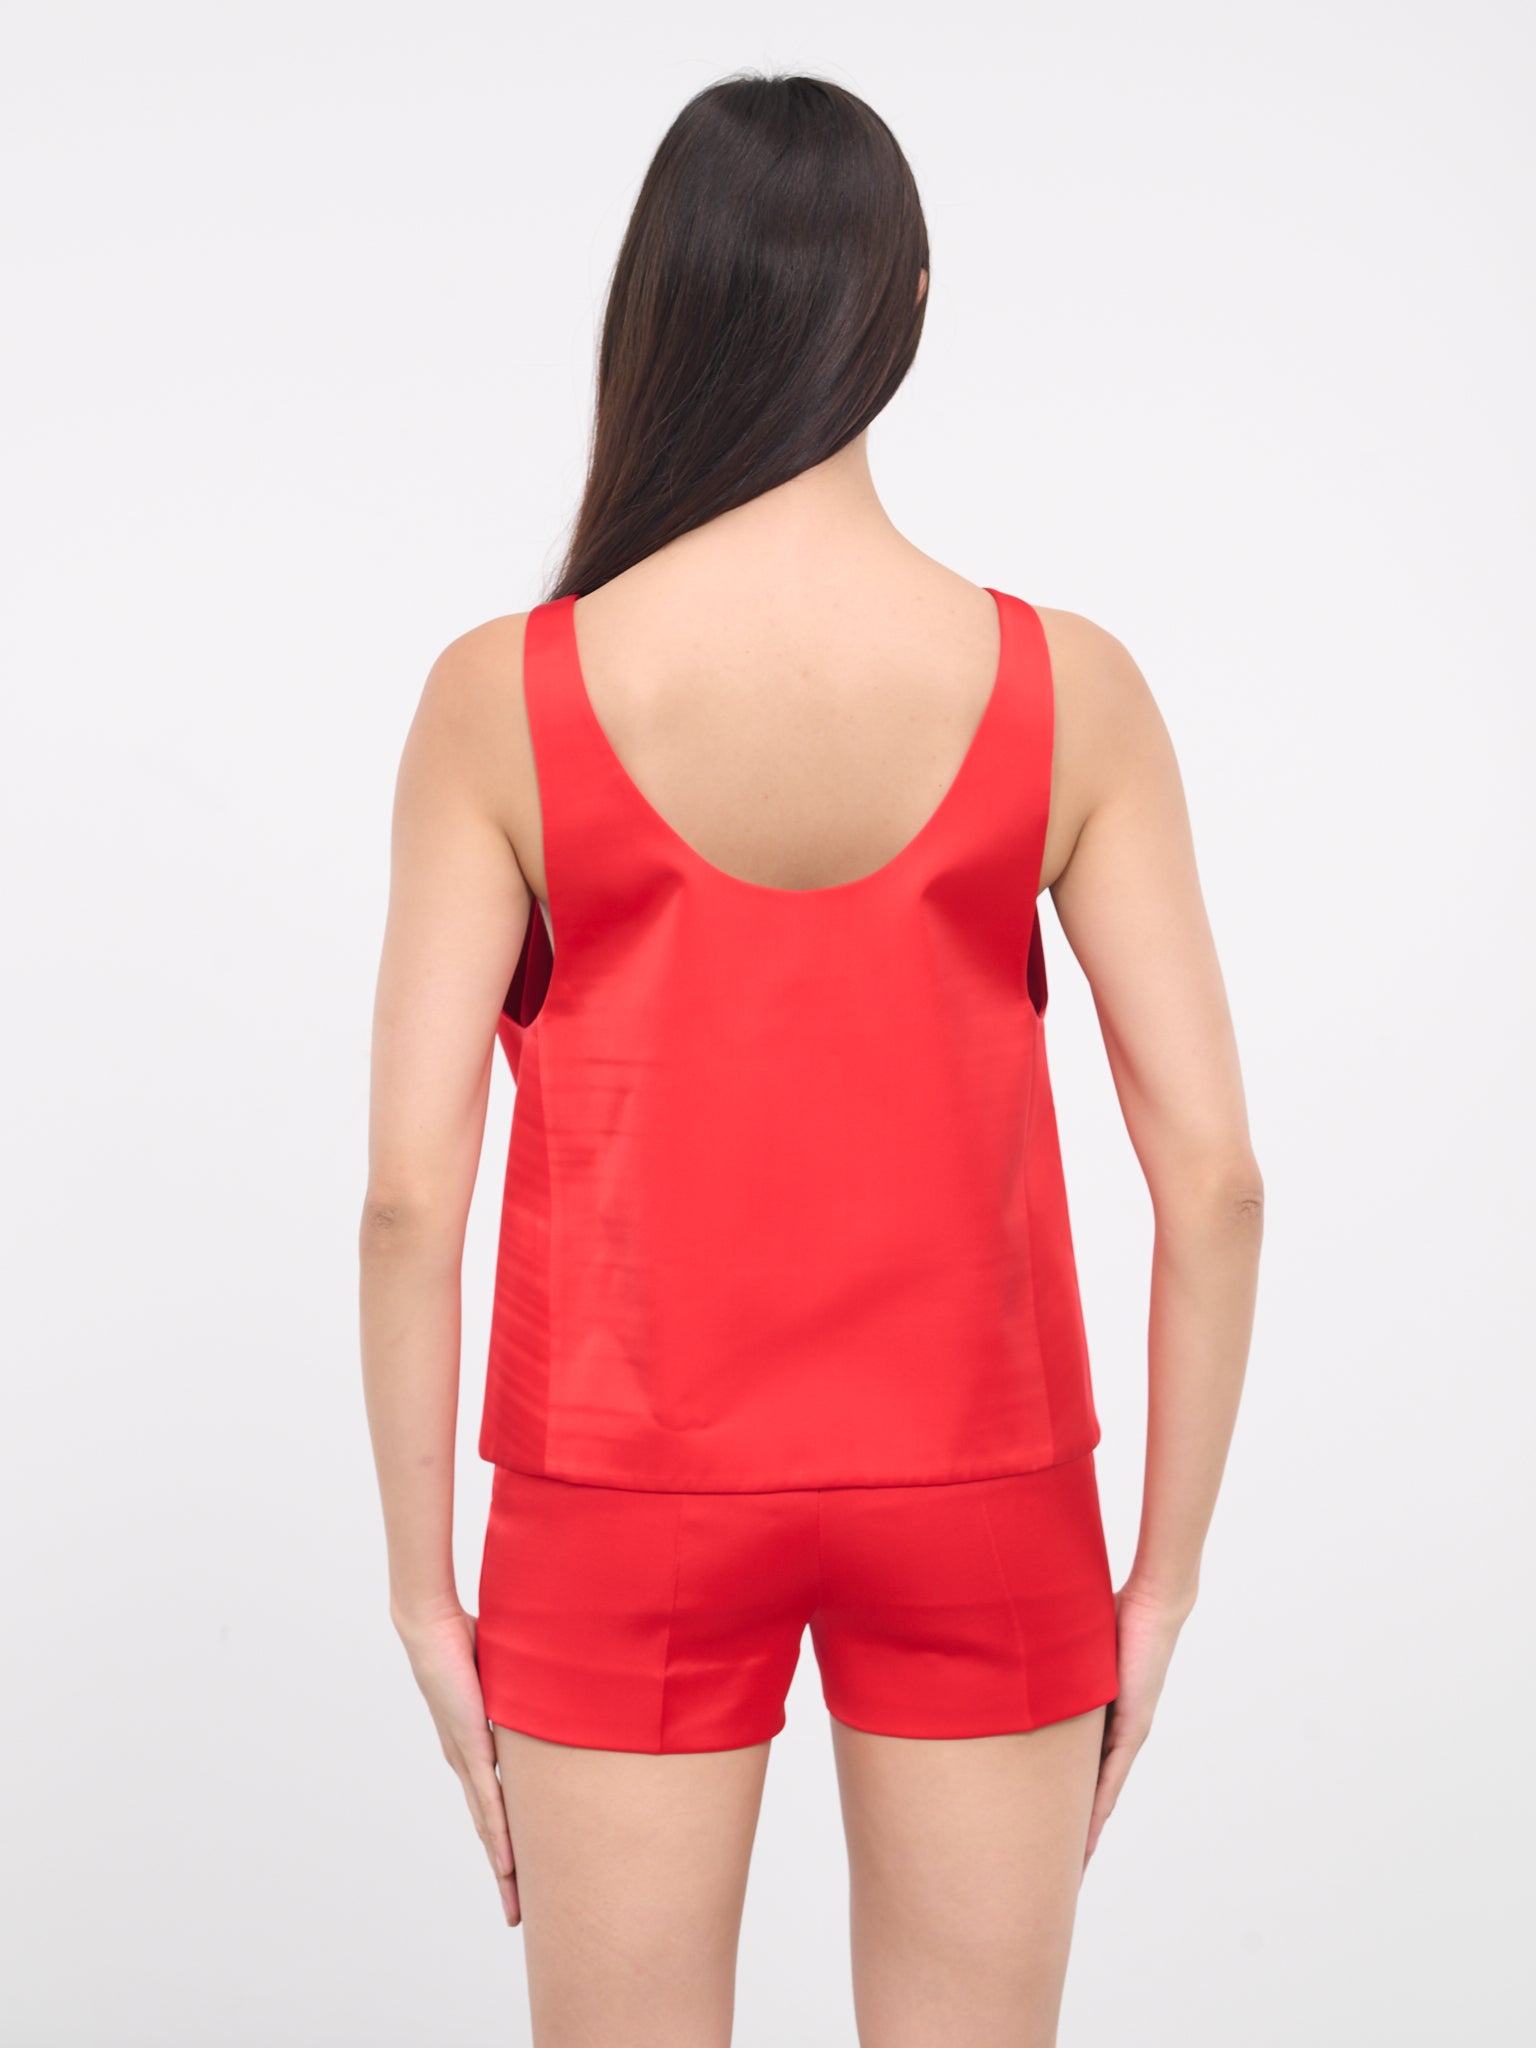 Sweetheart Top (BL0-24-168-W-RD-RED)